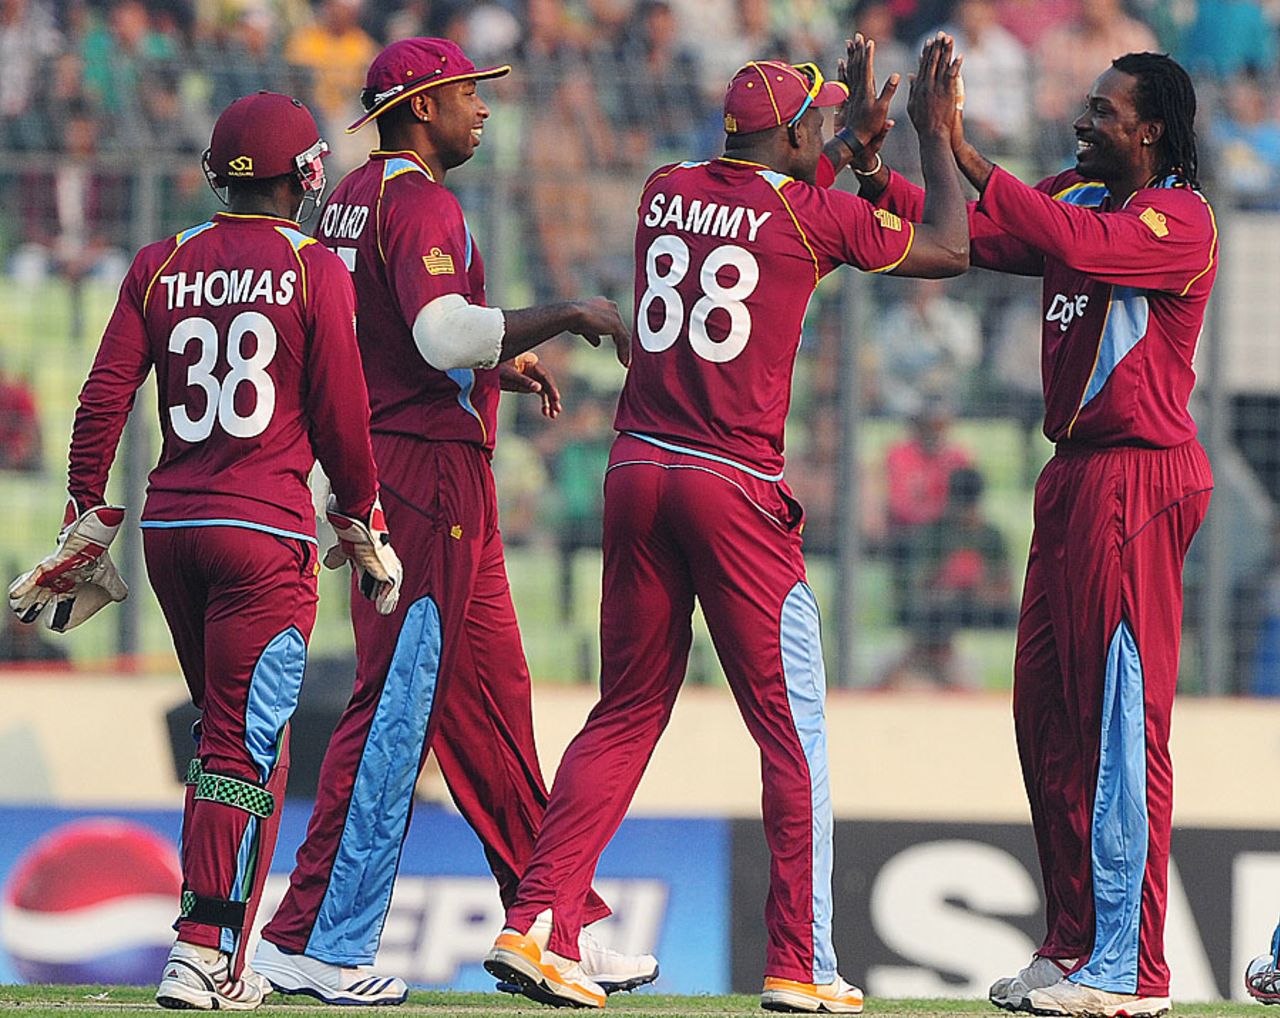 Chris Gayle and his team-mates celebrate a wicket, Bangladesh v West Indies, 3rd ODI, Mirpur, December 5, 2012